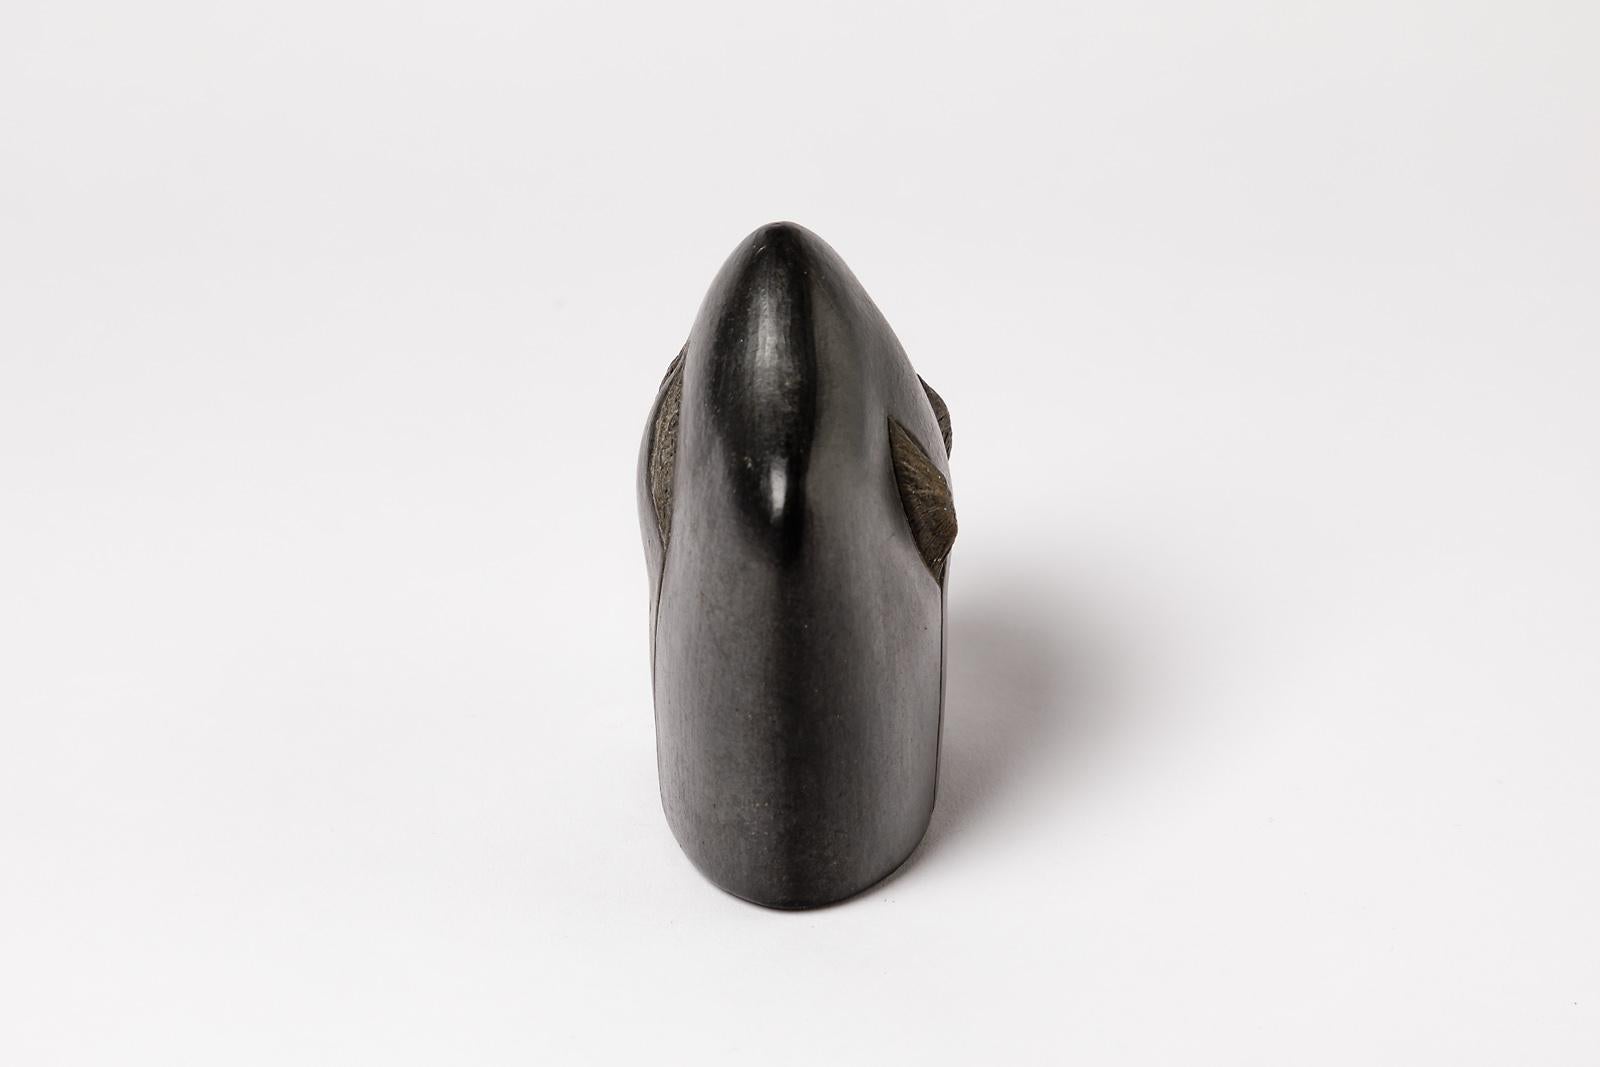 20th Century Abstract Black Ceramic Sculpture by Marionneau French Artist, circa 1980 For Sale